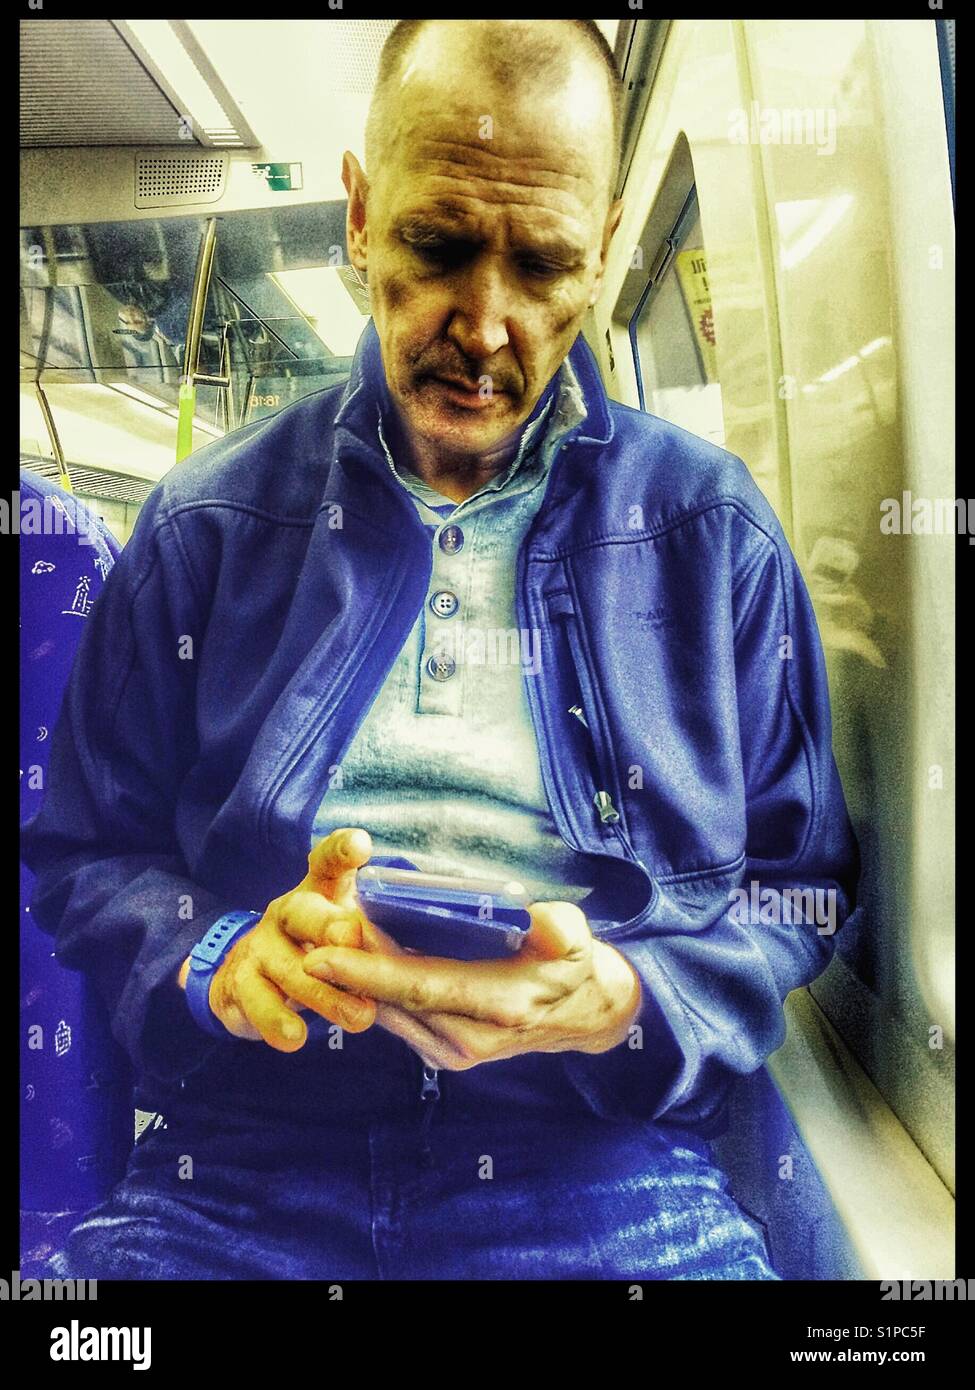 Middle aged Scandinavian man using a smartphone on the train, Sweden Stock Photo